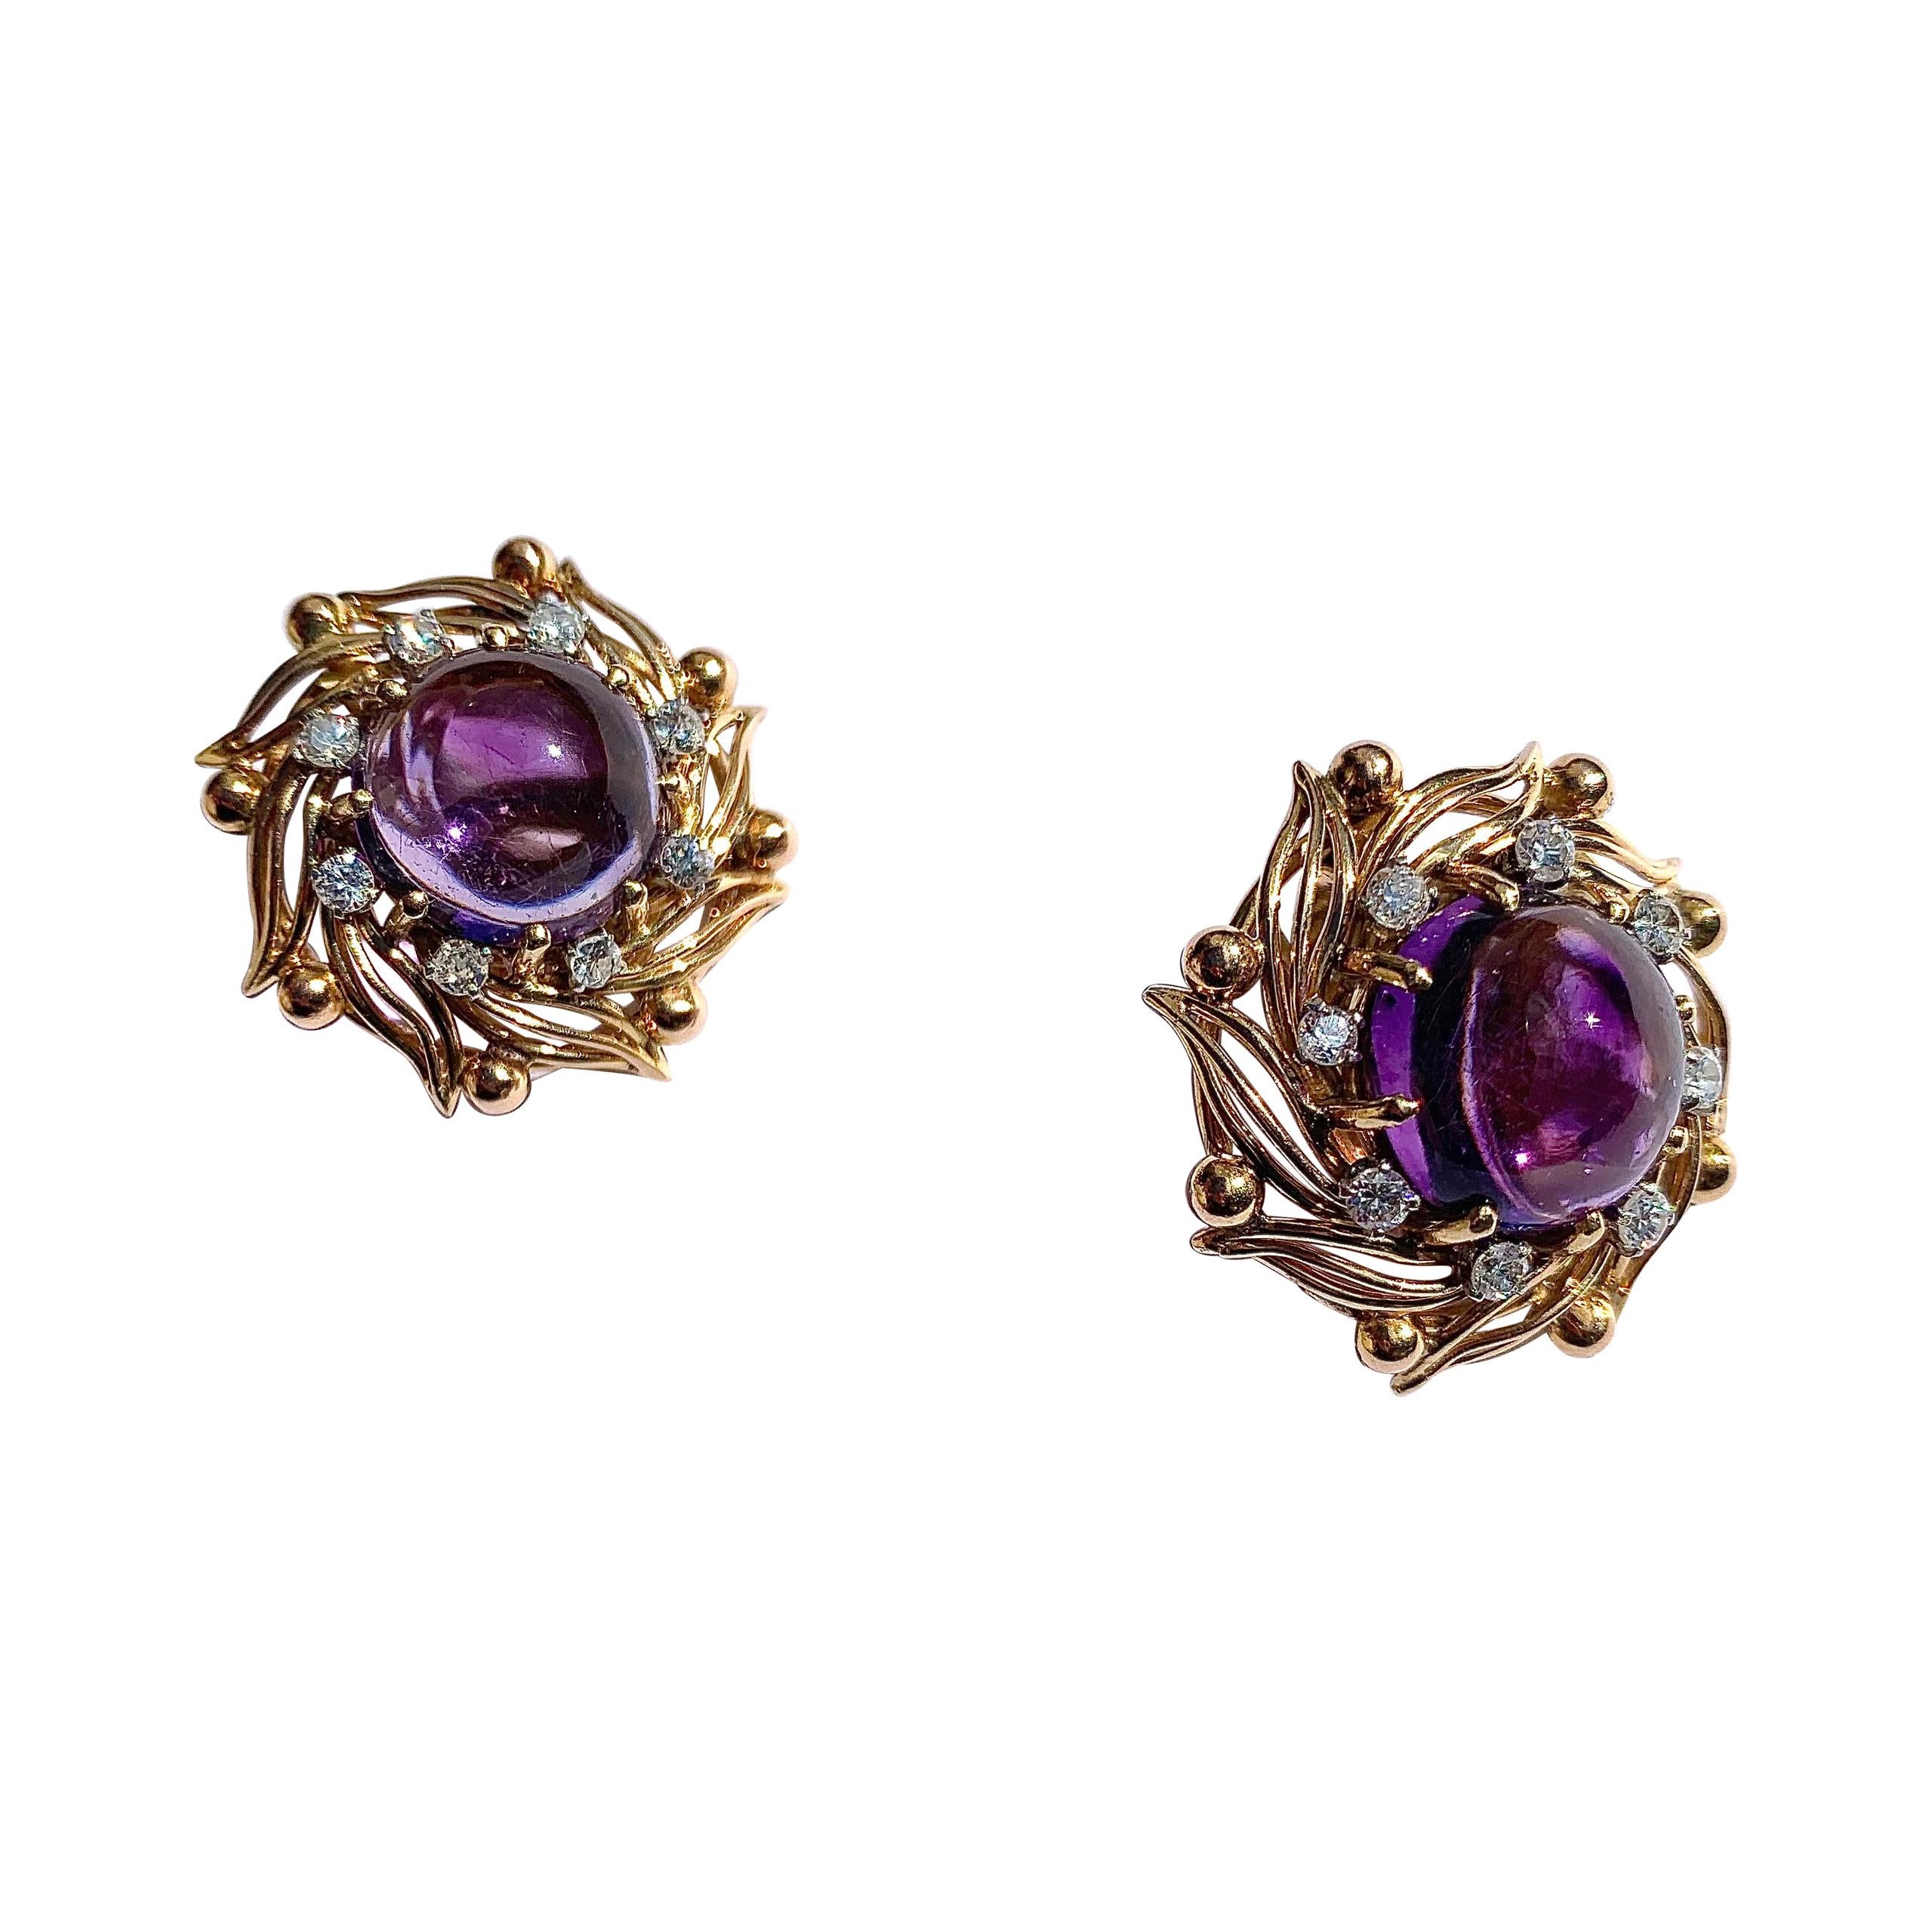 Art Deco Vintage Clip 0n Earrings with Amethyst Colour Oblong Stones and Shell Deco Design